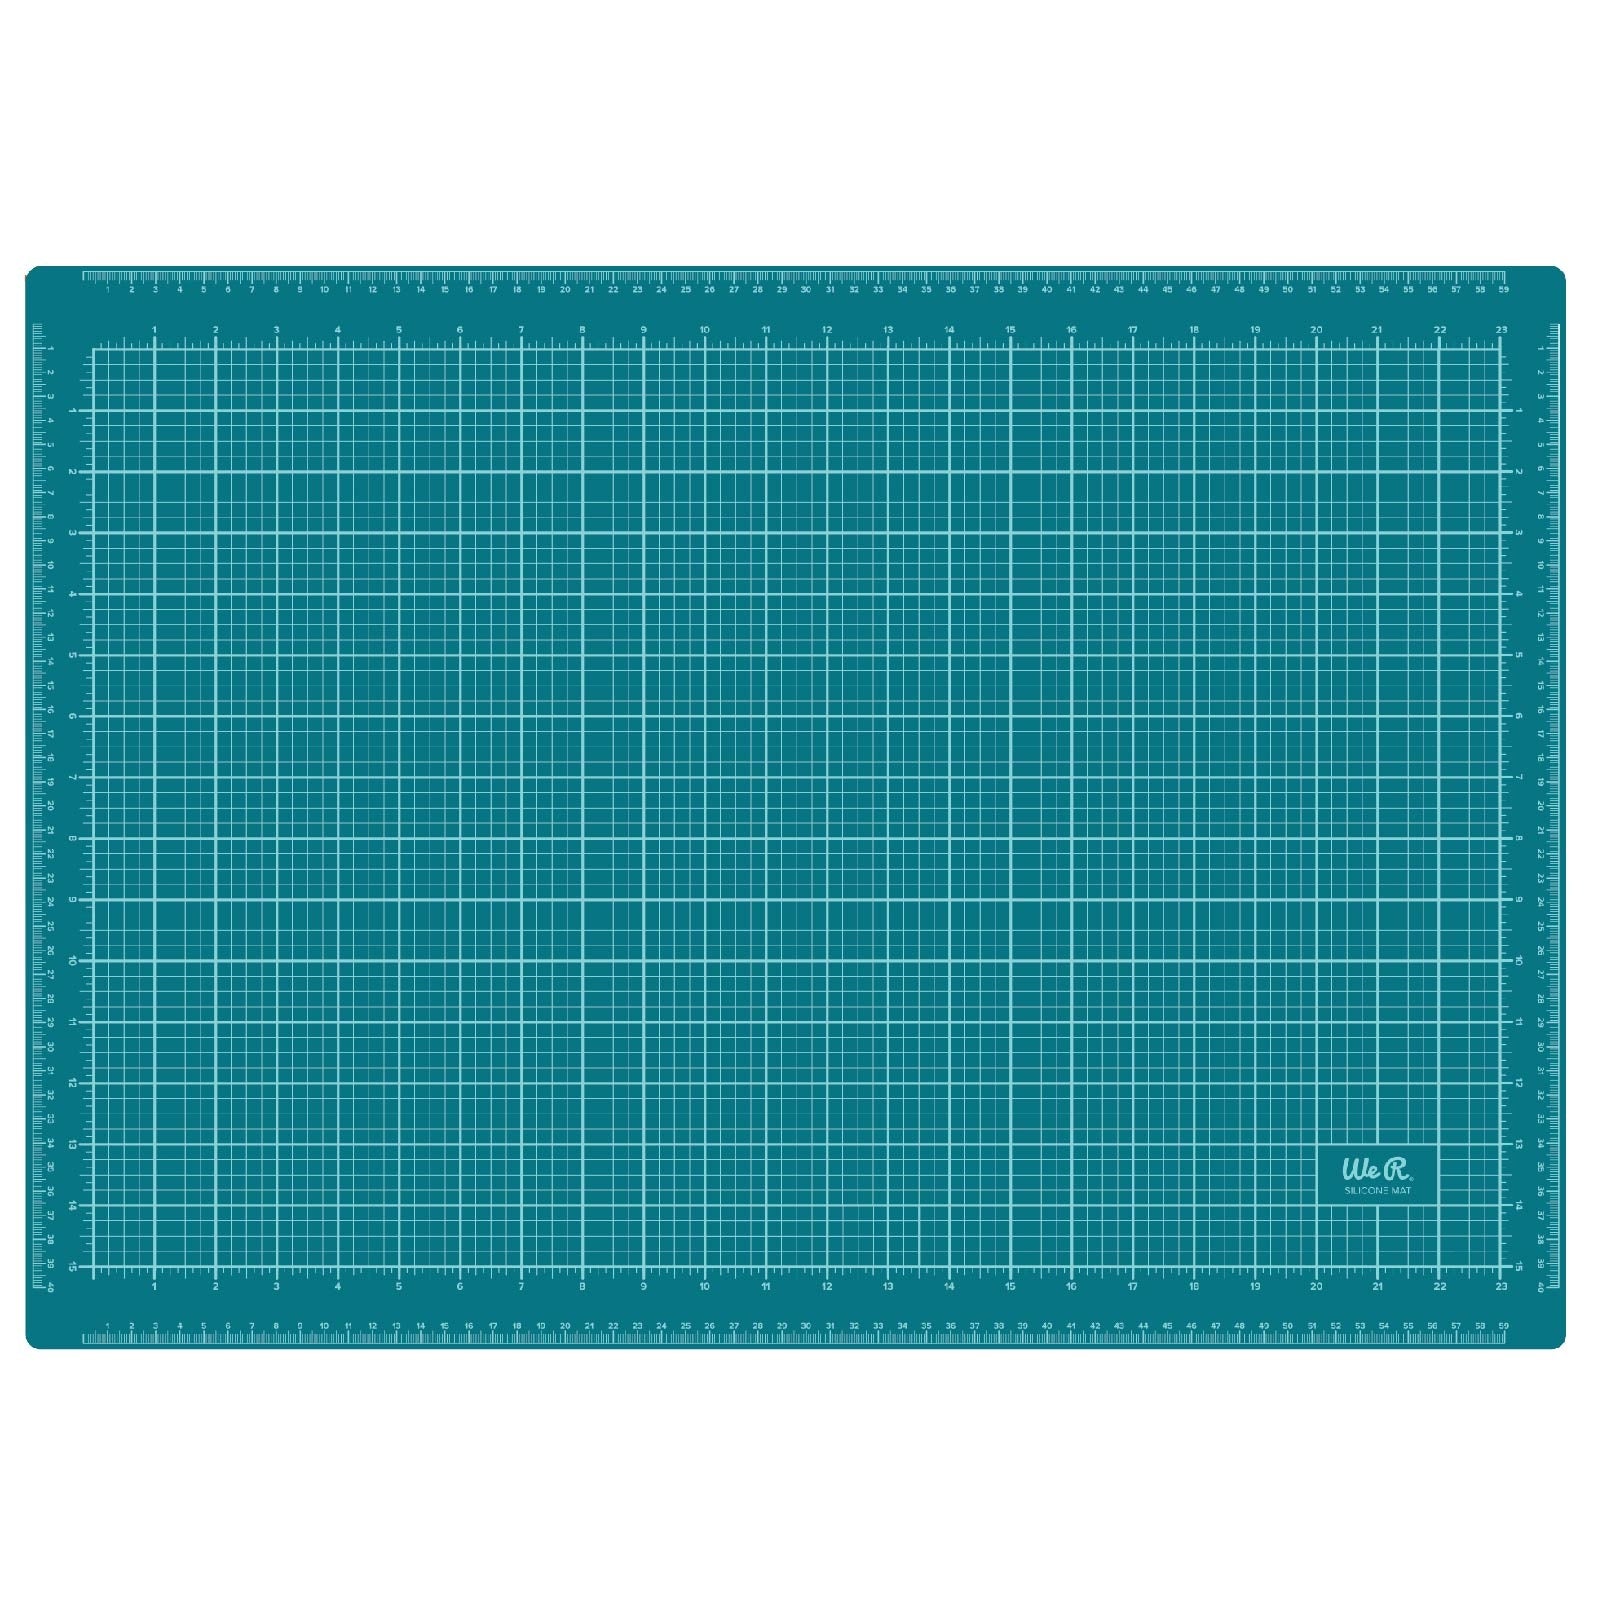 We R Memory Keepers Silicone Mat 25.2X17.7